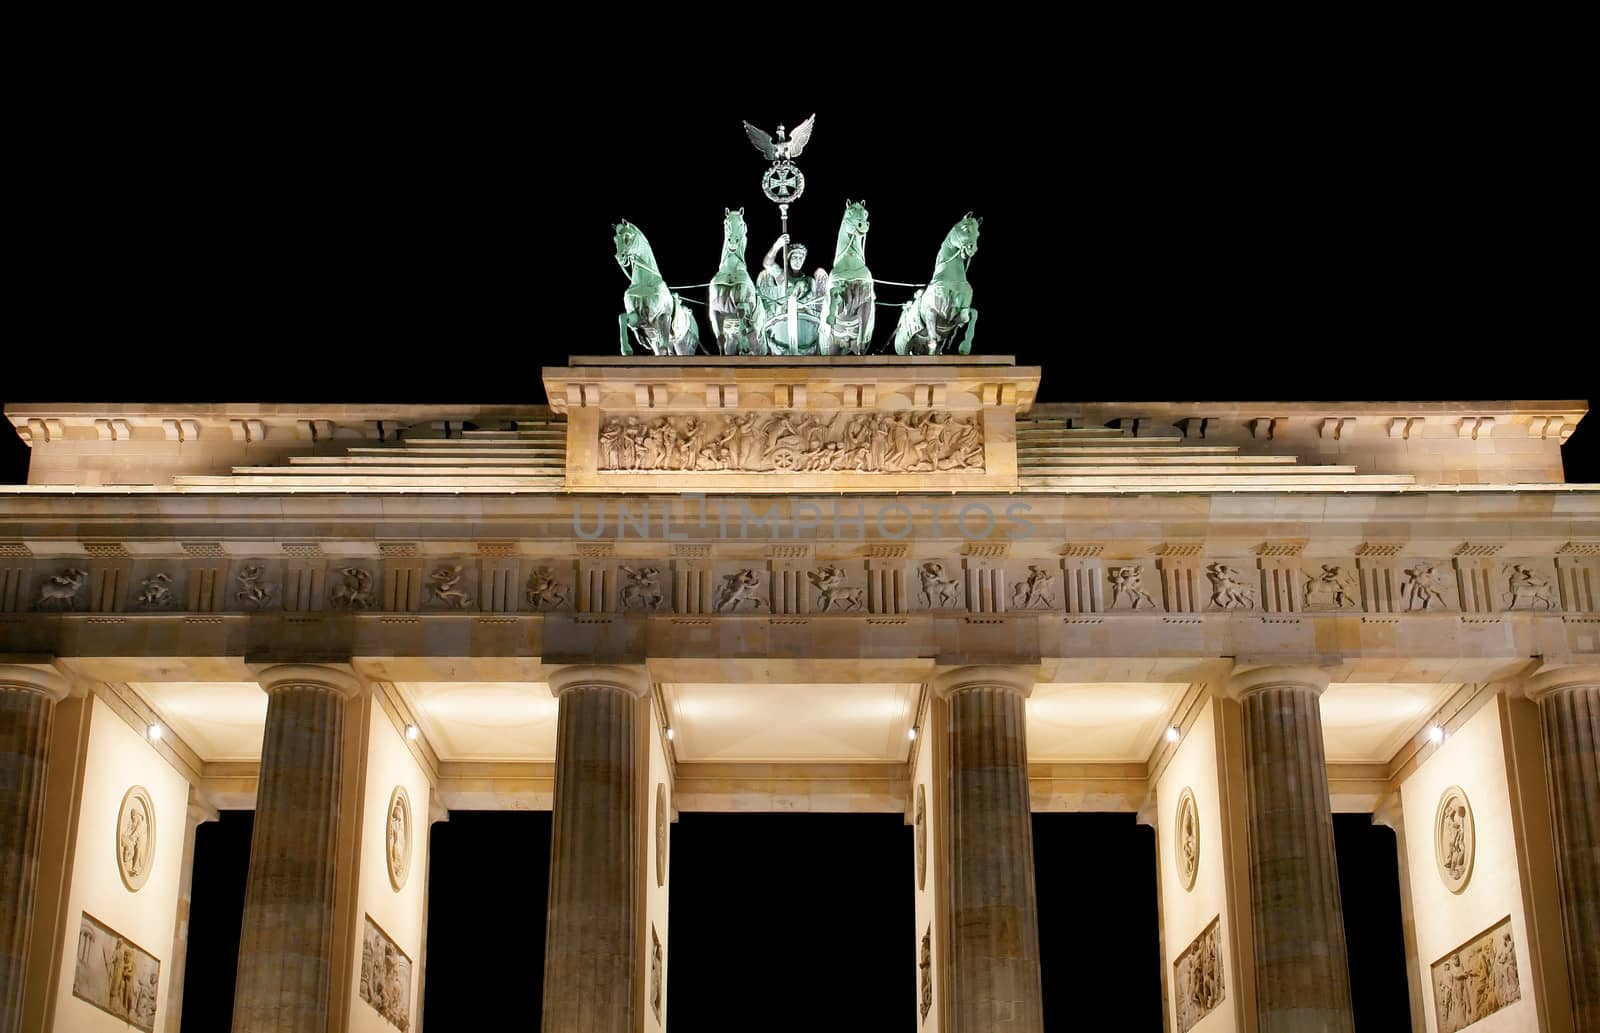 Brandenburg Gate at night, a former city gate and one of the main symbols of Berlin, Germany